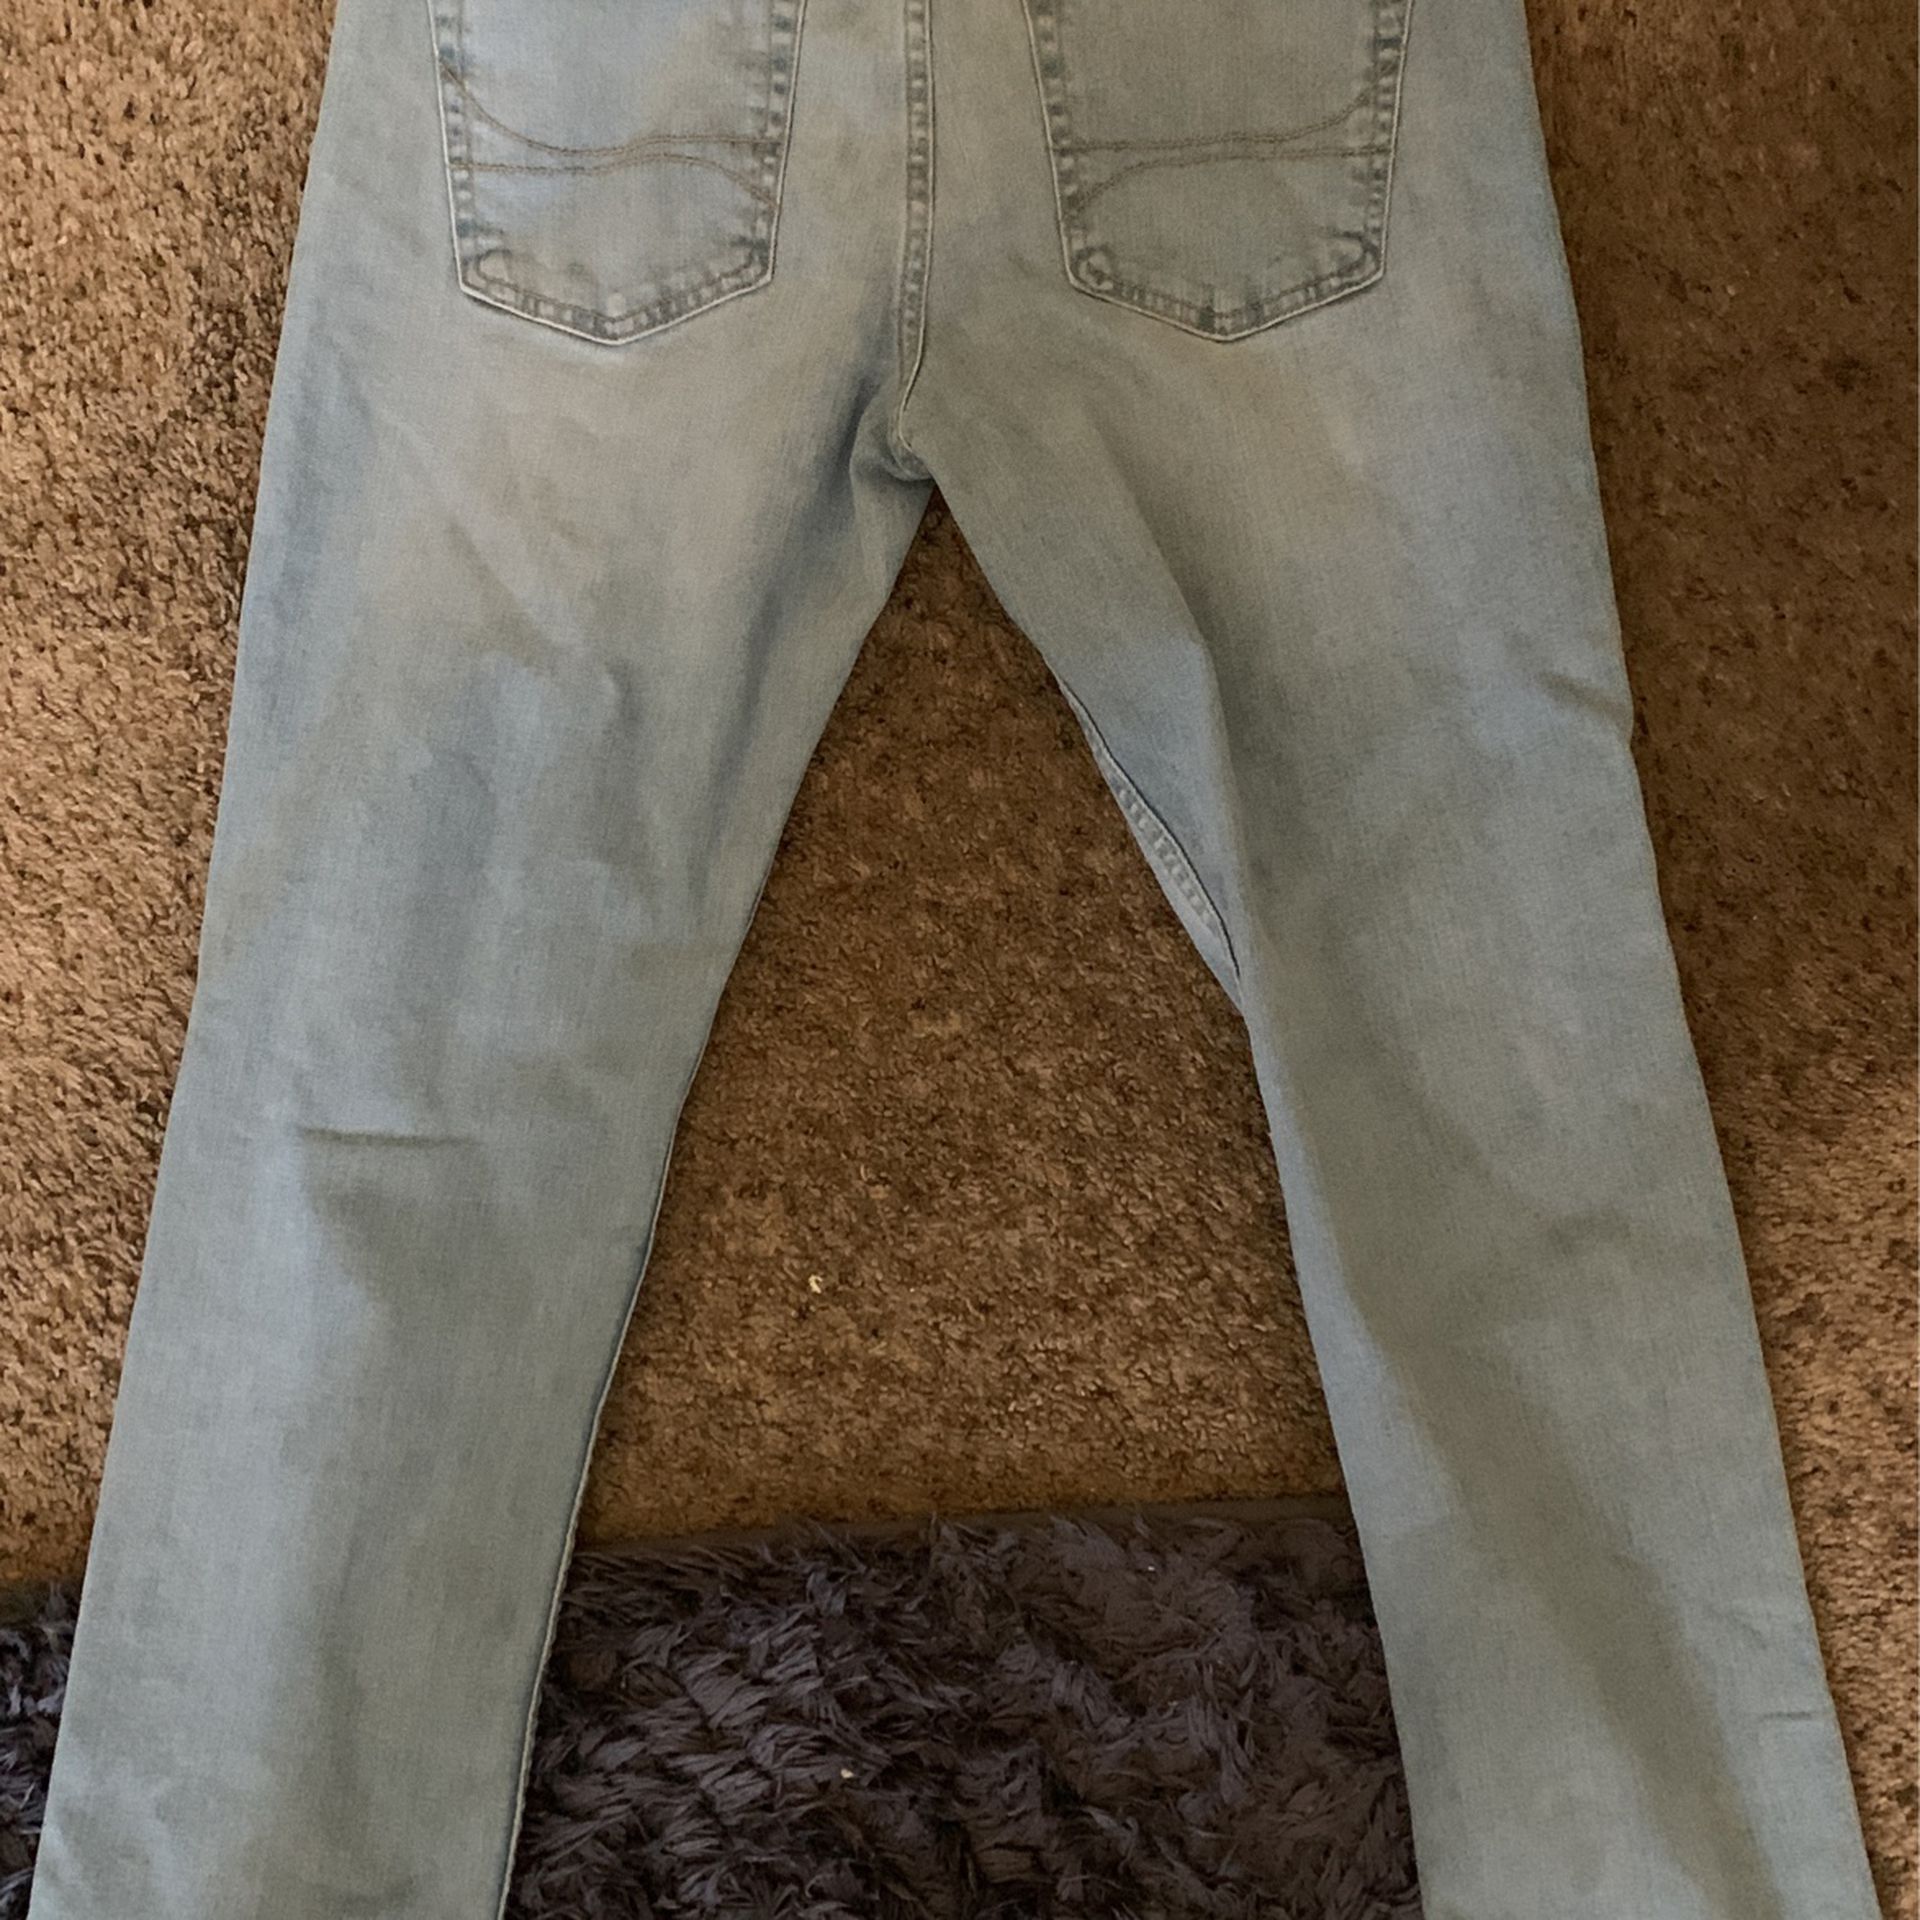 Slim Straight Hollister Jeans 33x32 for Sale in Seaside, CA - OfferUp